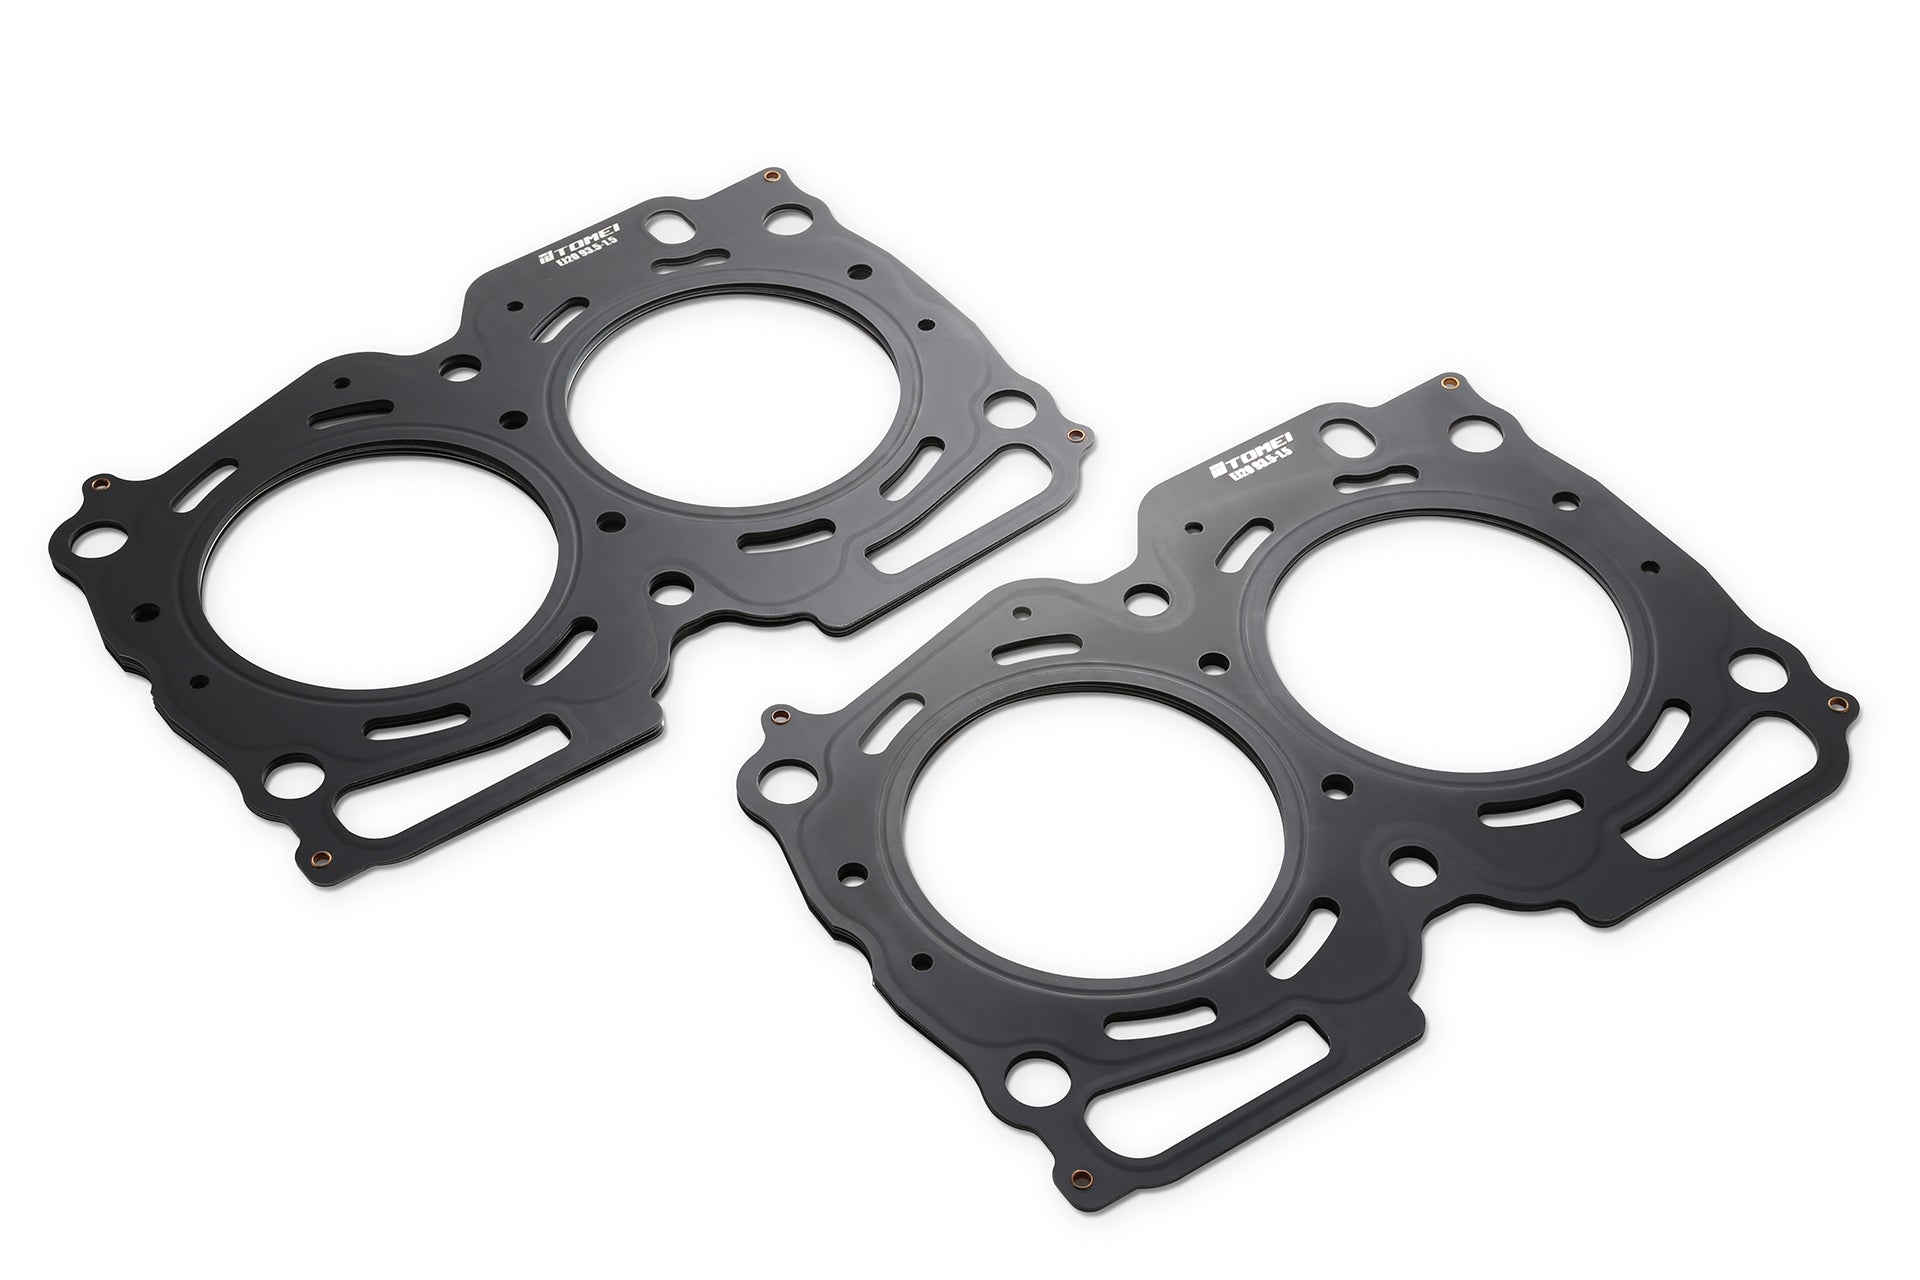 TOMEI HEAD GASKET EJ20 SINGLE AVCS 93.5-1.0mm (Previous Part Number 1361935101)